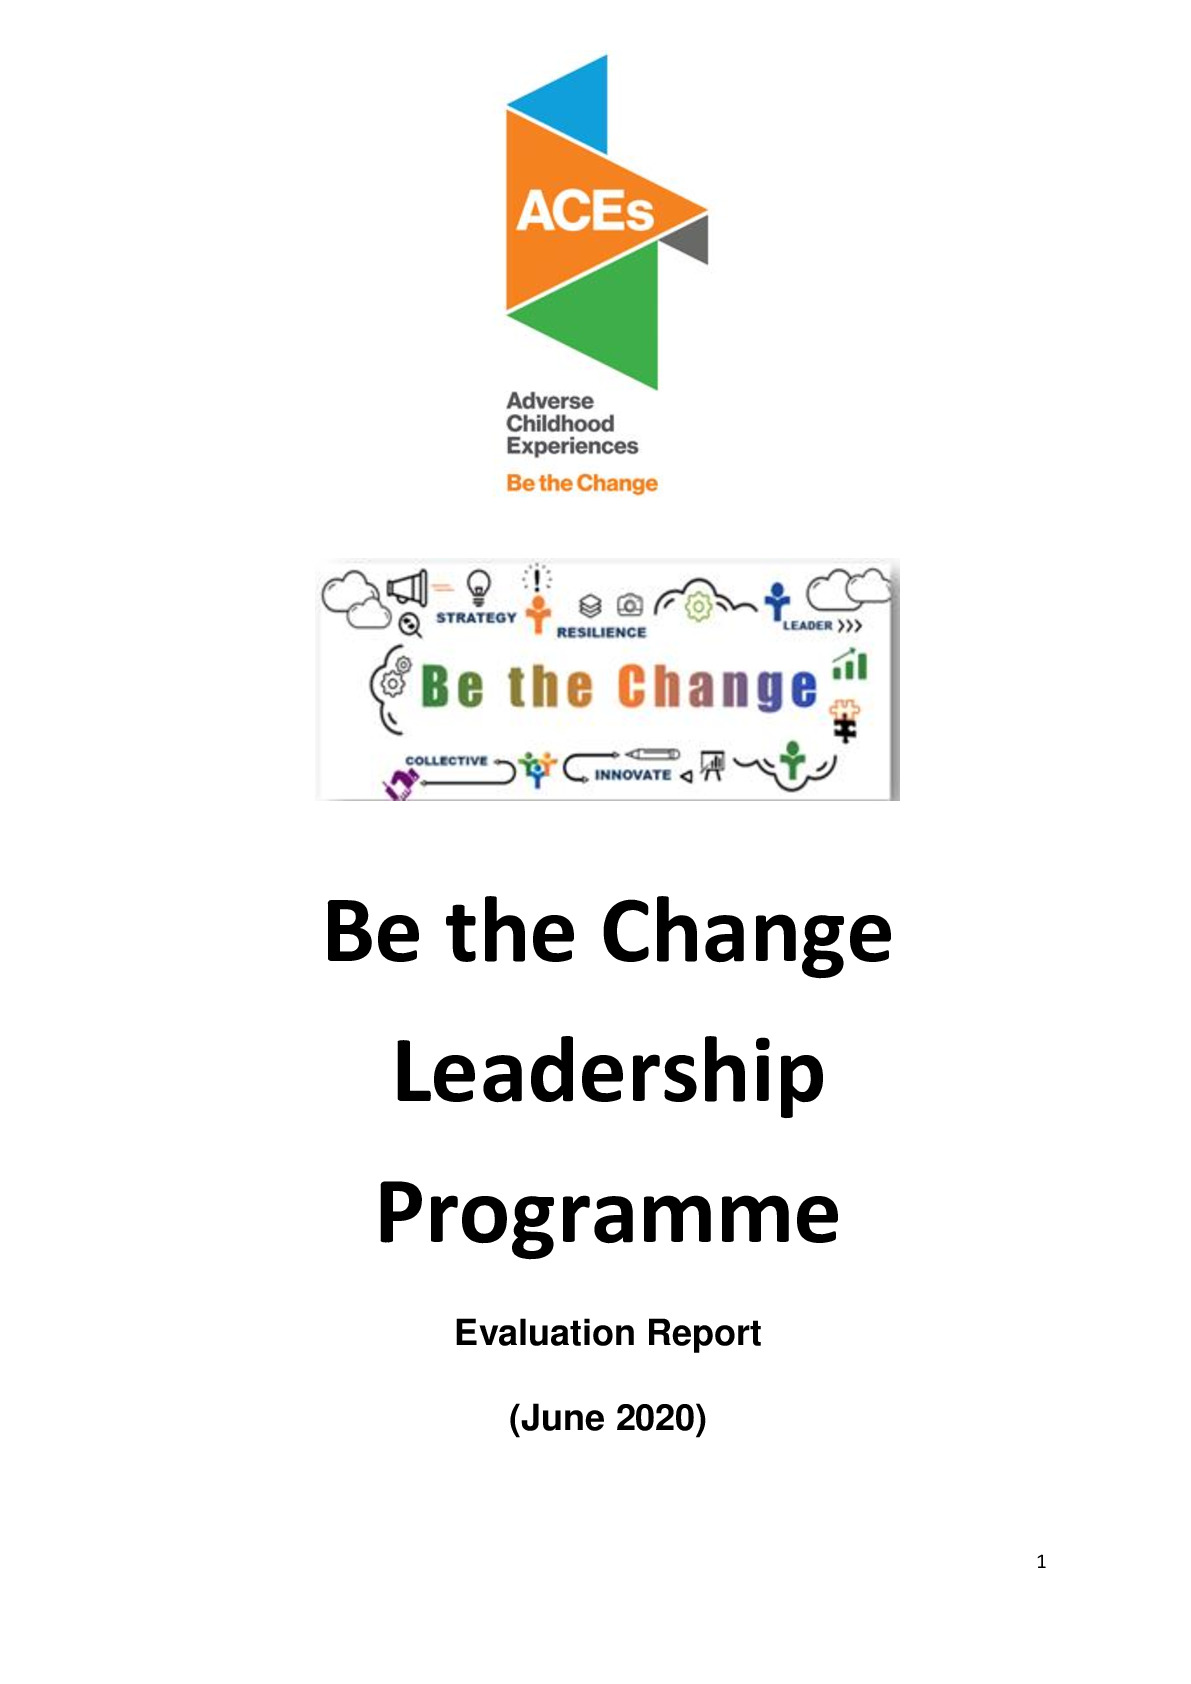 Be the Change Programme - Evaluation Report (Final)